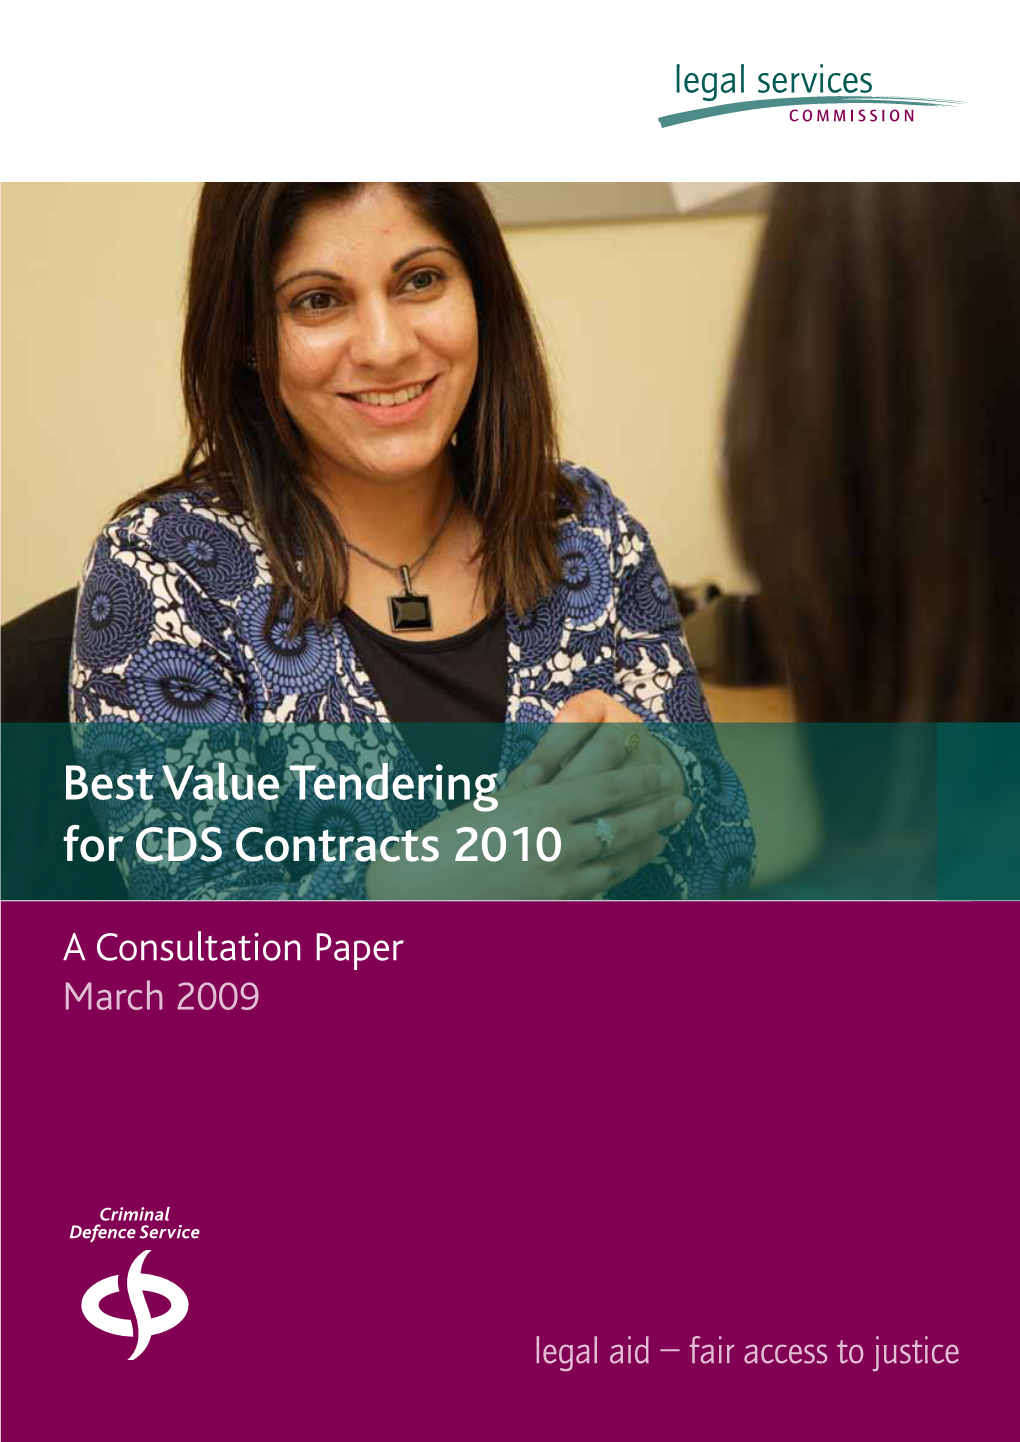 Best Value Tendering for CDS Contracts 2010